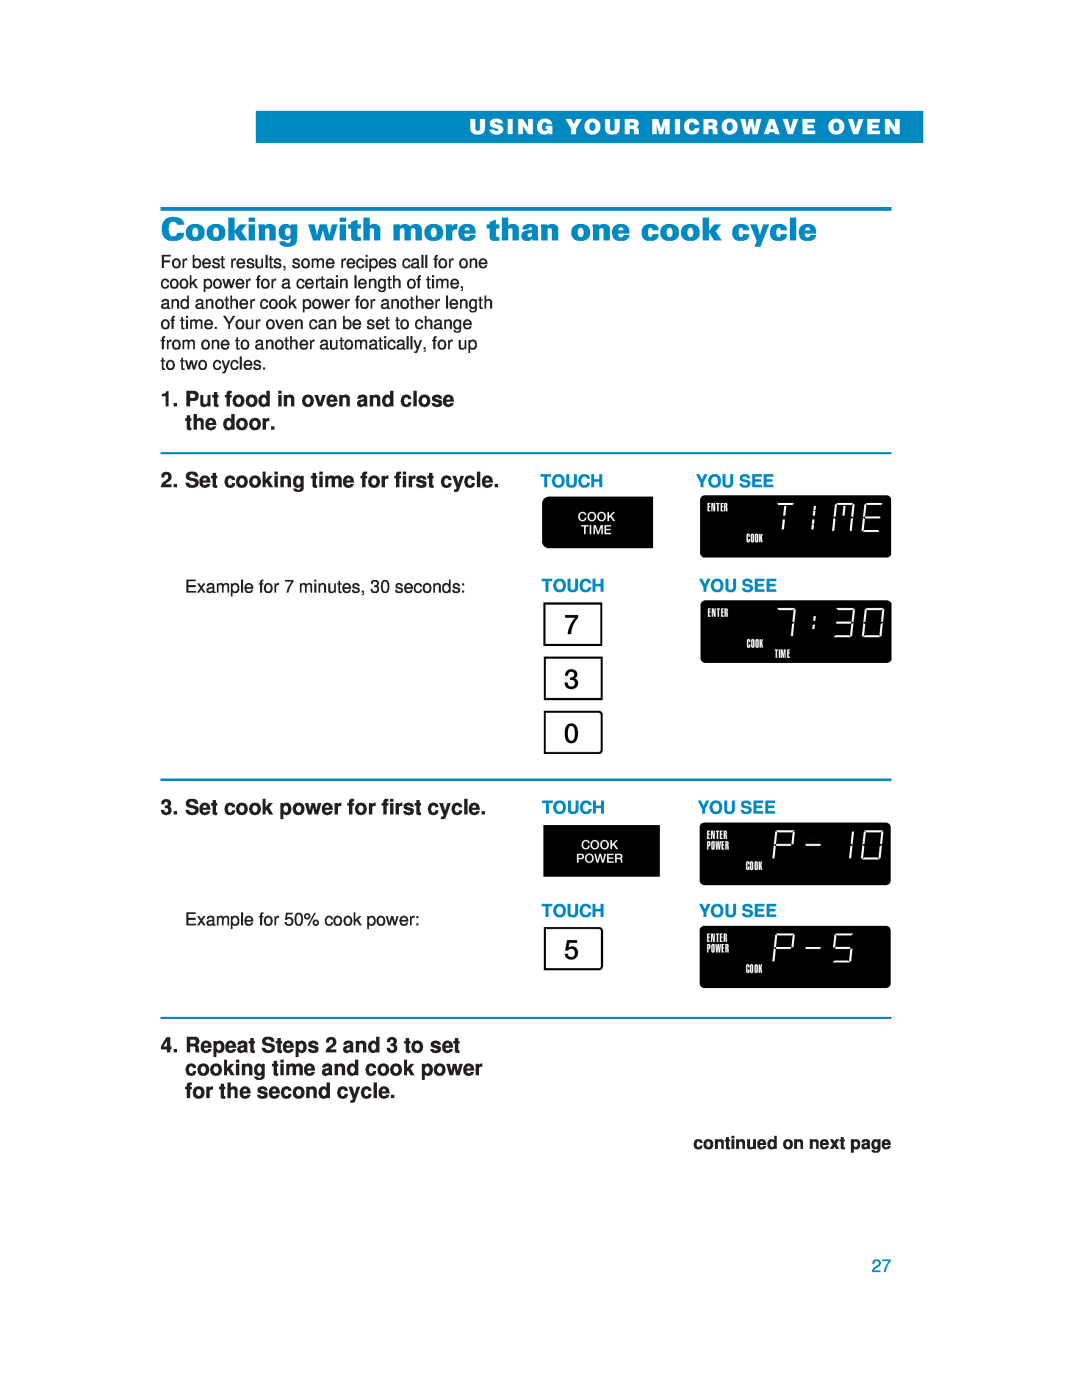 Whirlpool YMH6130XE Cooking with more than one cook cycle, Set cooking time for first cycle, Using Your Microwave Oven 